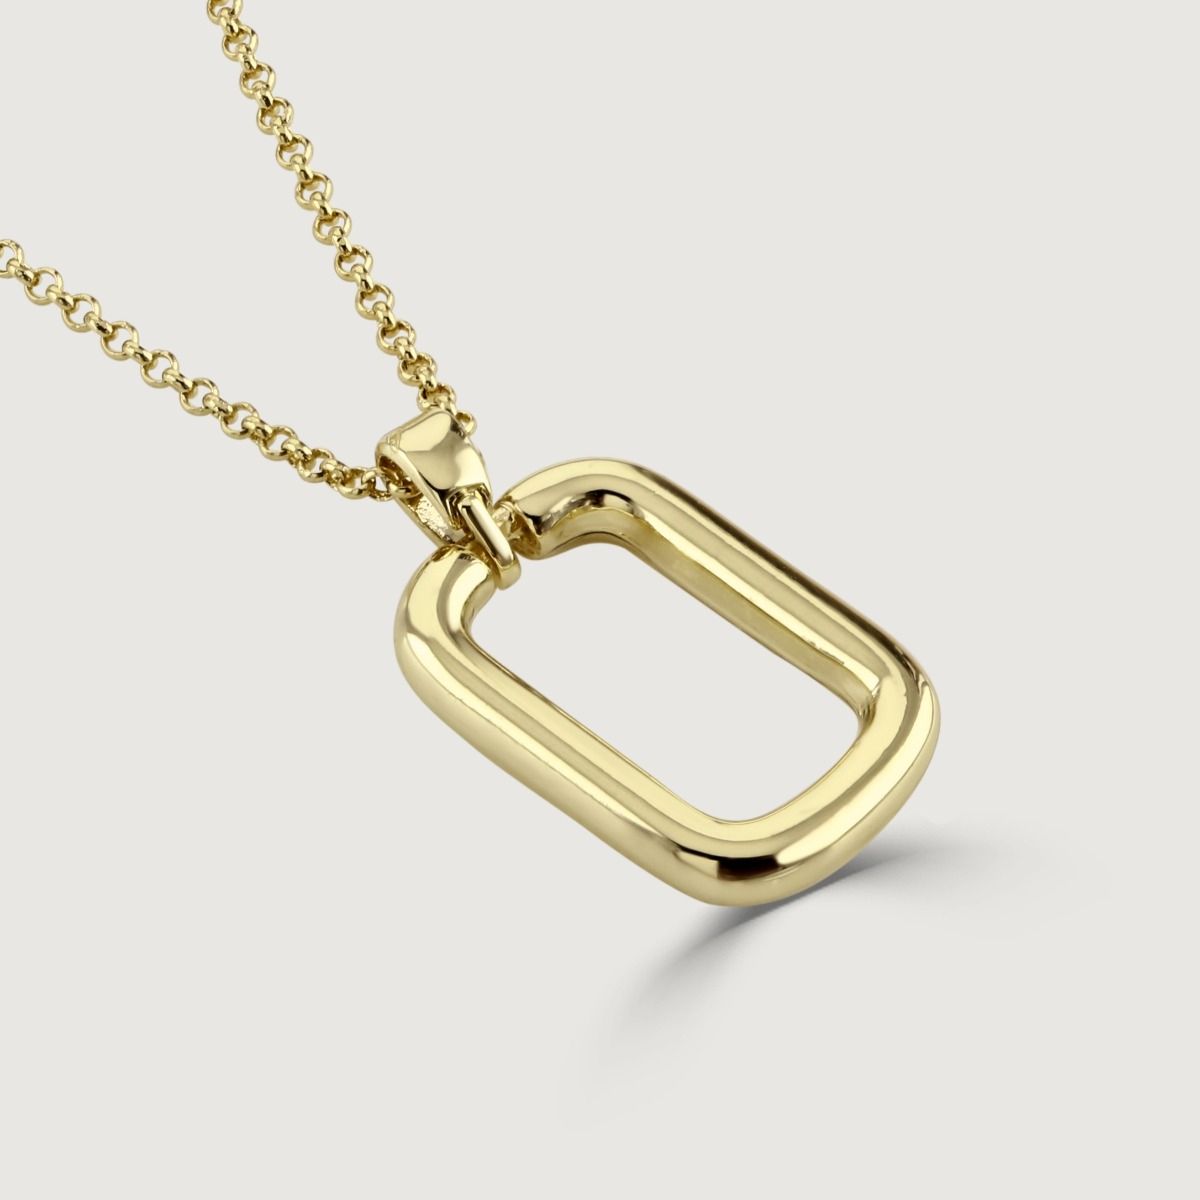 The Rectangle Polished Gold Hoop Pendant is a contemporary and sleek piece. With its polished gold finish and rectangular hoop design, this pendant exudes contemporary elegance. The geometric shape adds a touch of modernity. 